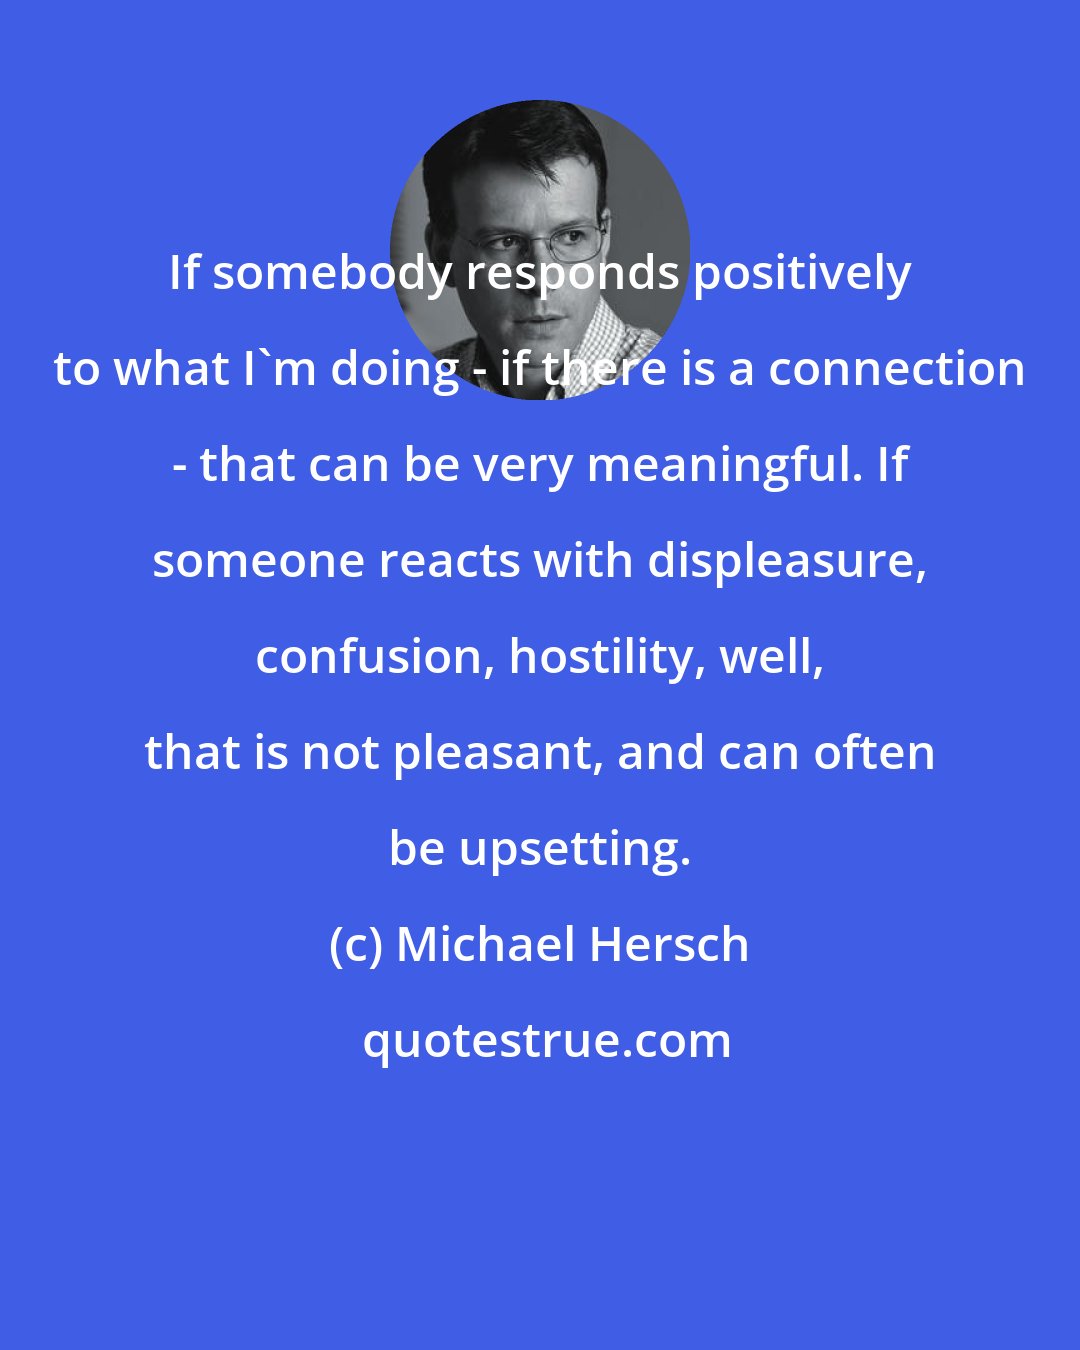 Michael Hersch: If somebody responds positively to what I'm doing - if there is a connection - that can be very meaningful. If someone reacts with displeasure, confusion, hostility, well, that is not pleasant, and can often be upsetting.